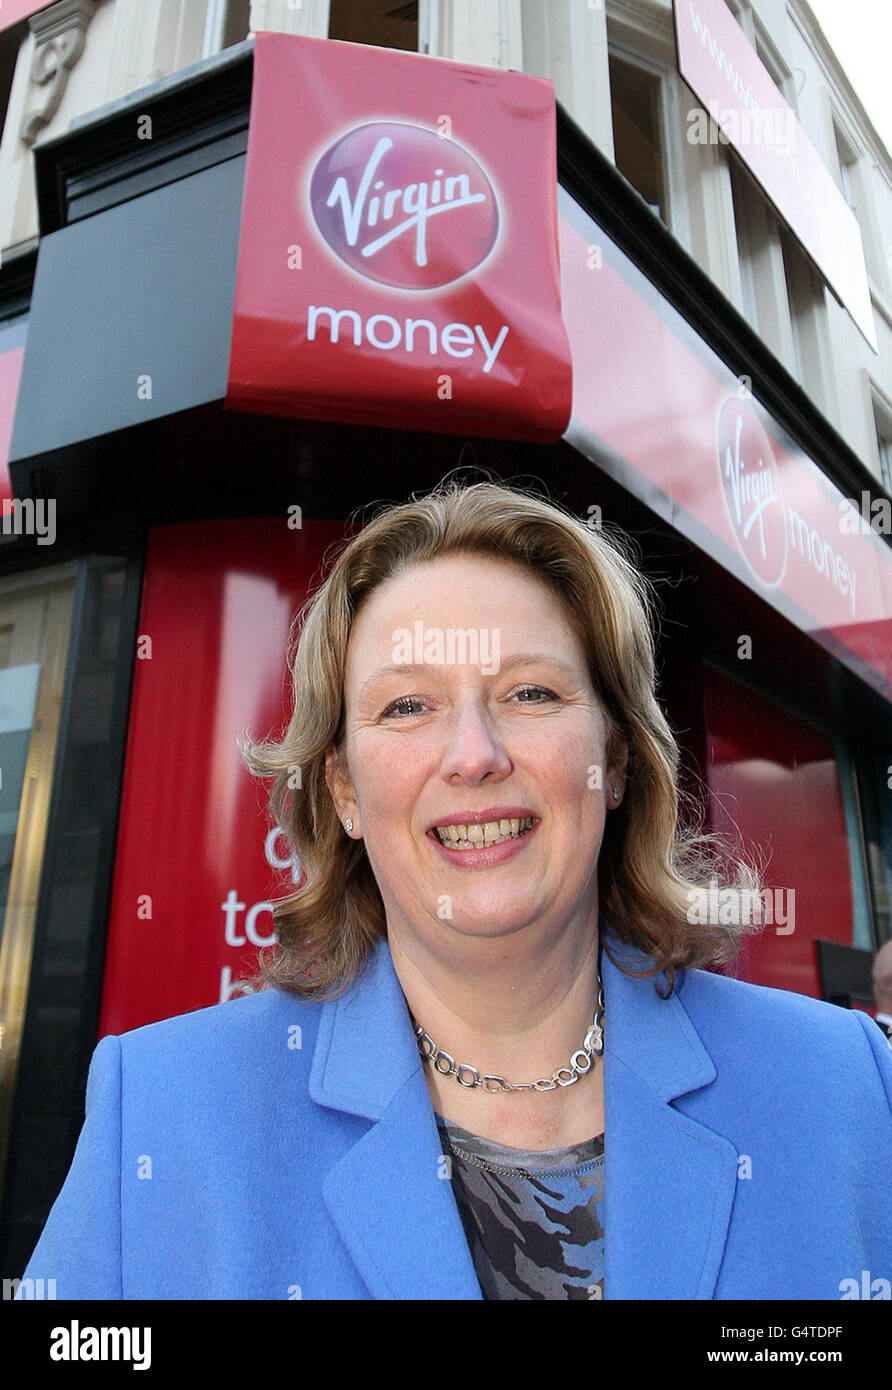 Jayne-Anne Gadhia, Chief Executive officer at Virgin Money at the New Virgin Money branch, at the former Northern Rock Branch on Northumberland Street in Newcastle. Stock Photo